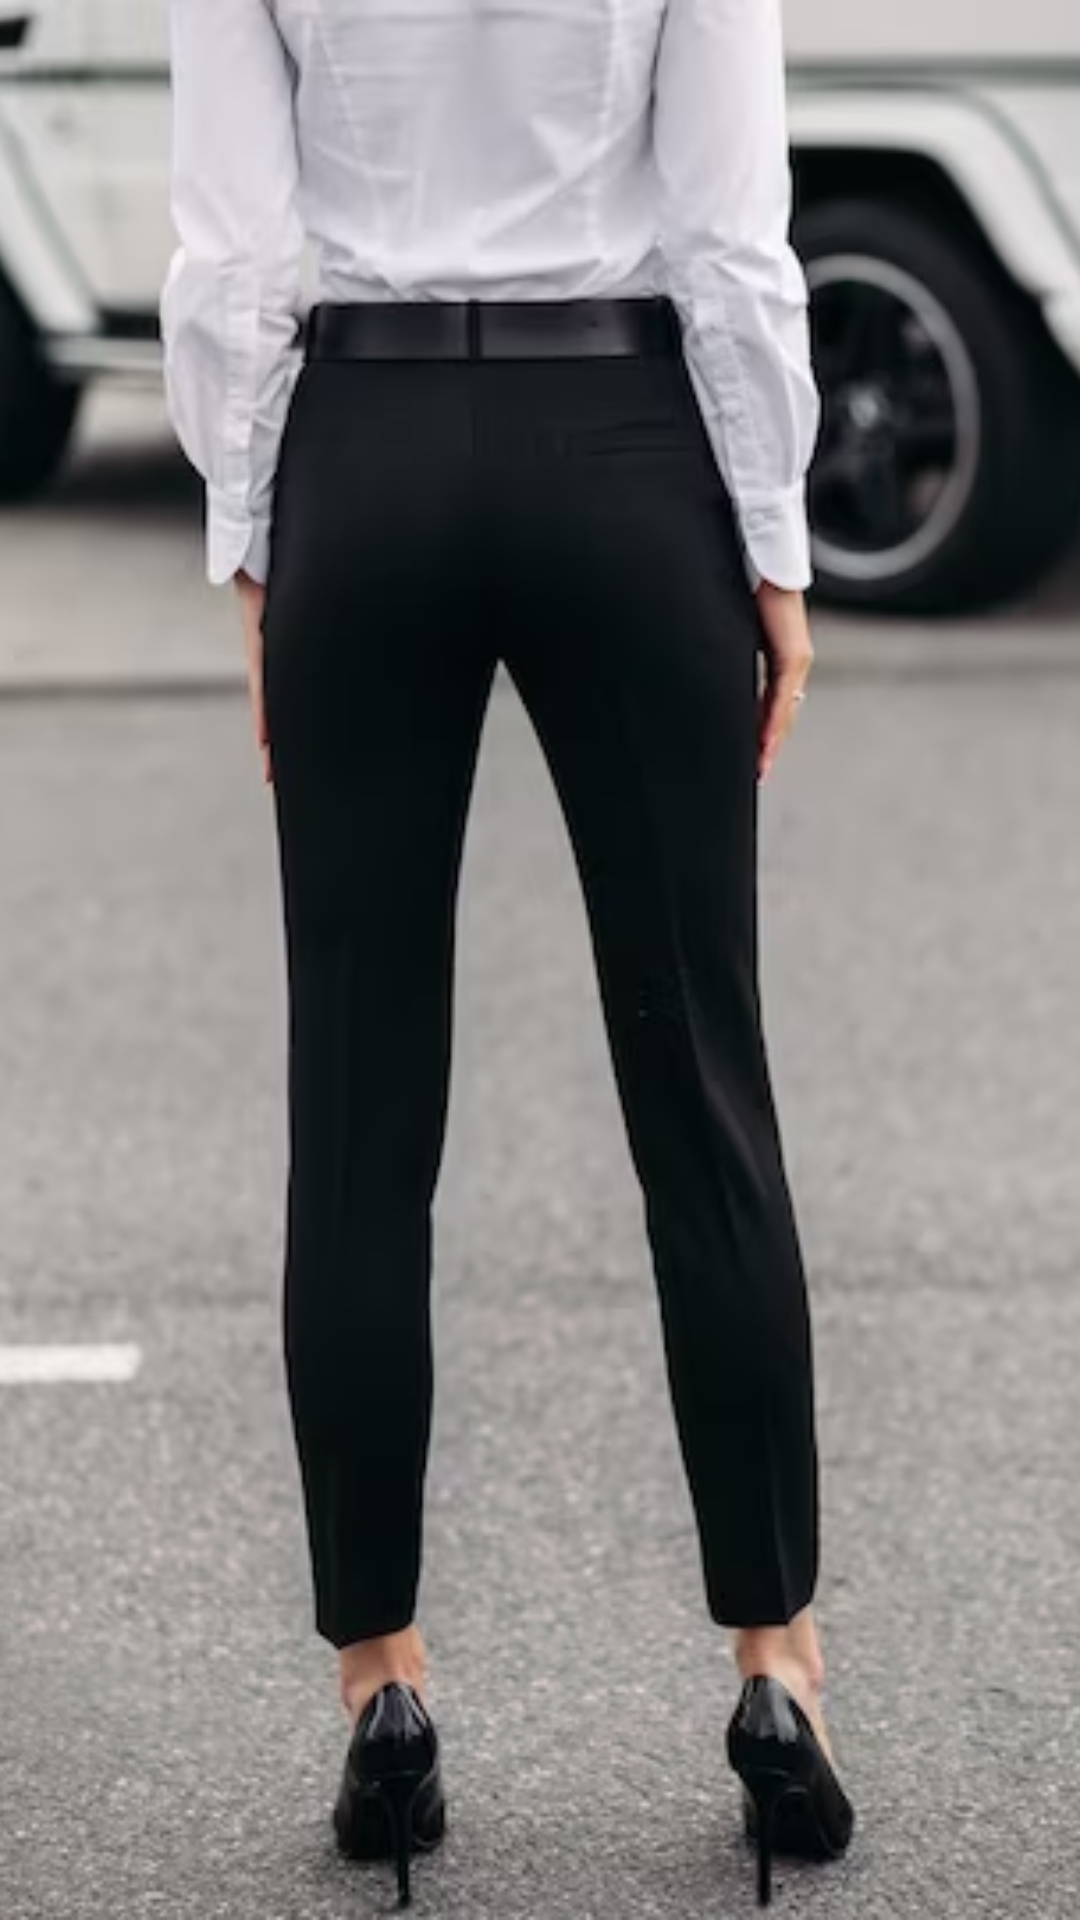 The statement black pants and 10 different ways it can be styled.